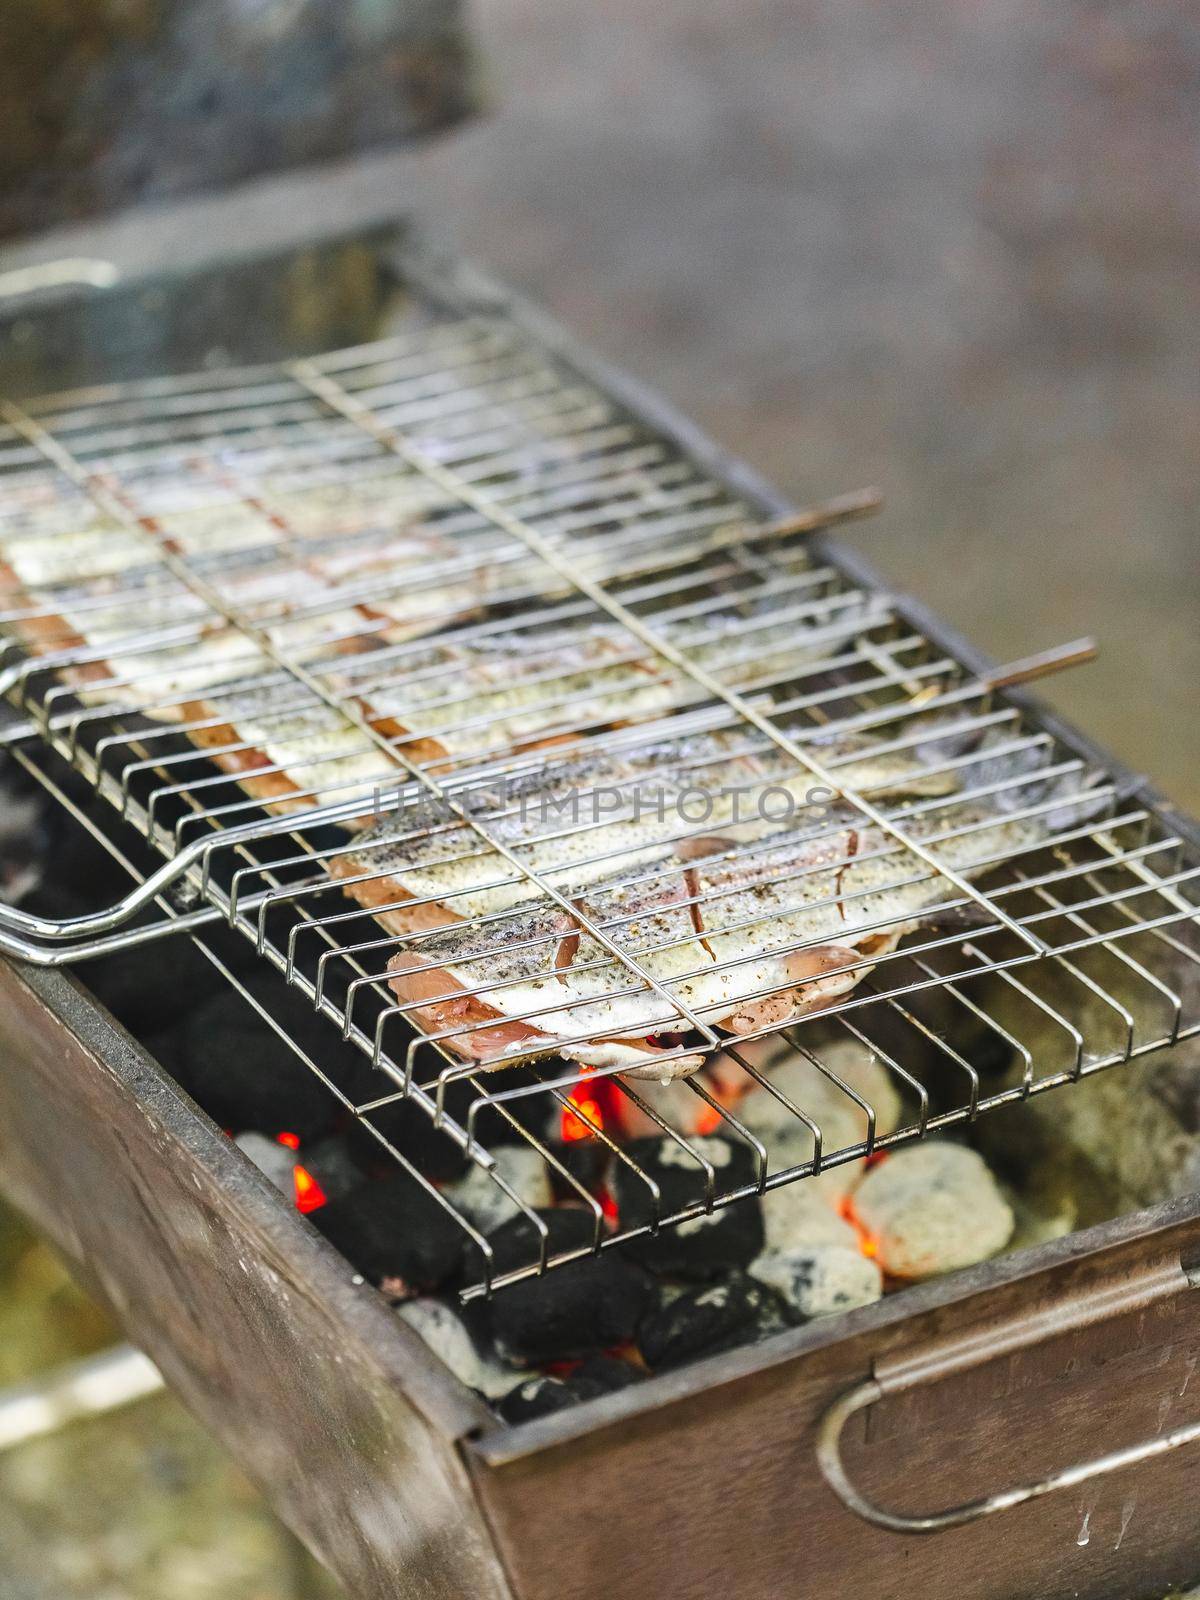 Preparing fresh trout fish on charcoal grill for Summer picnic party